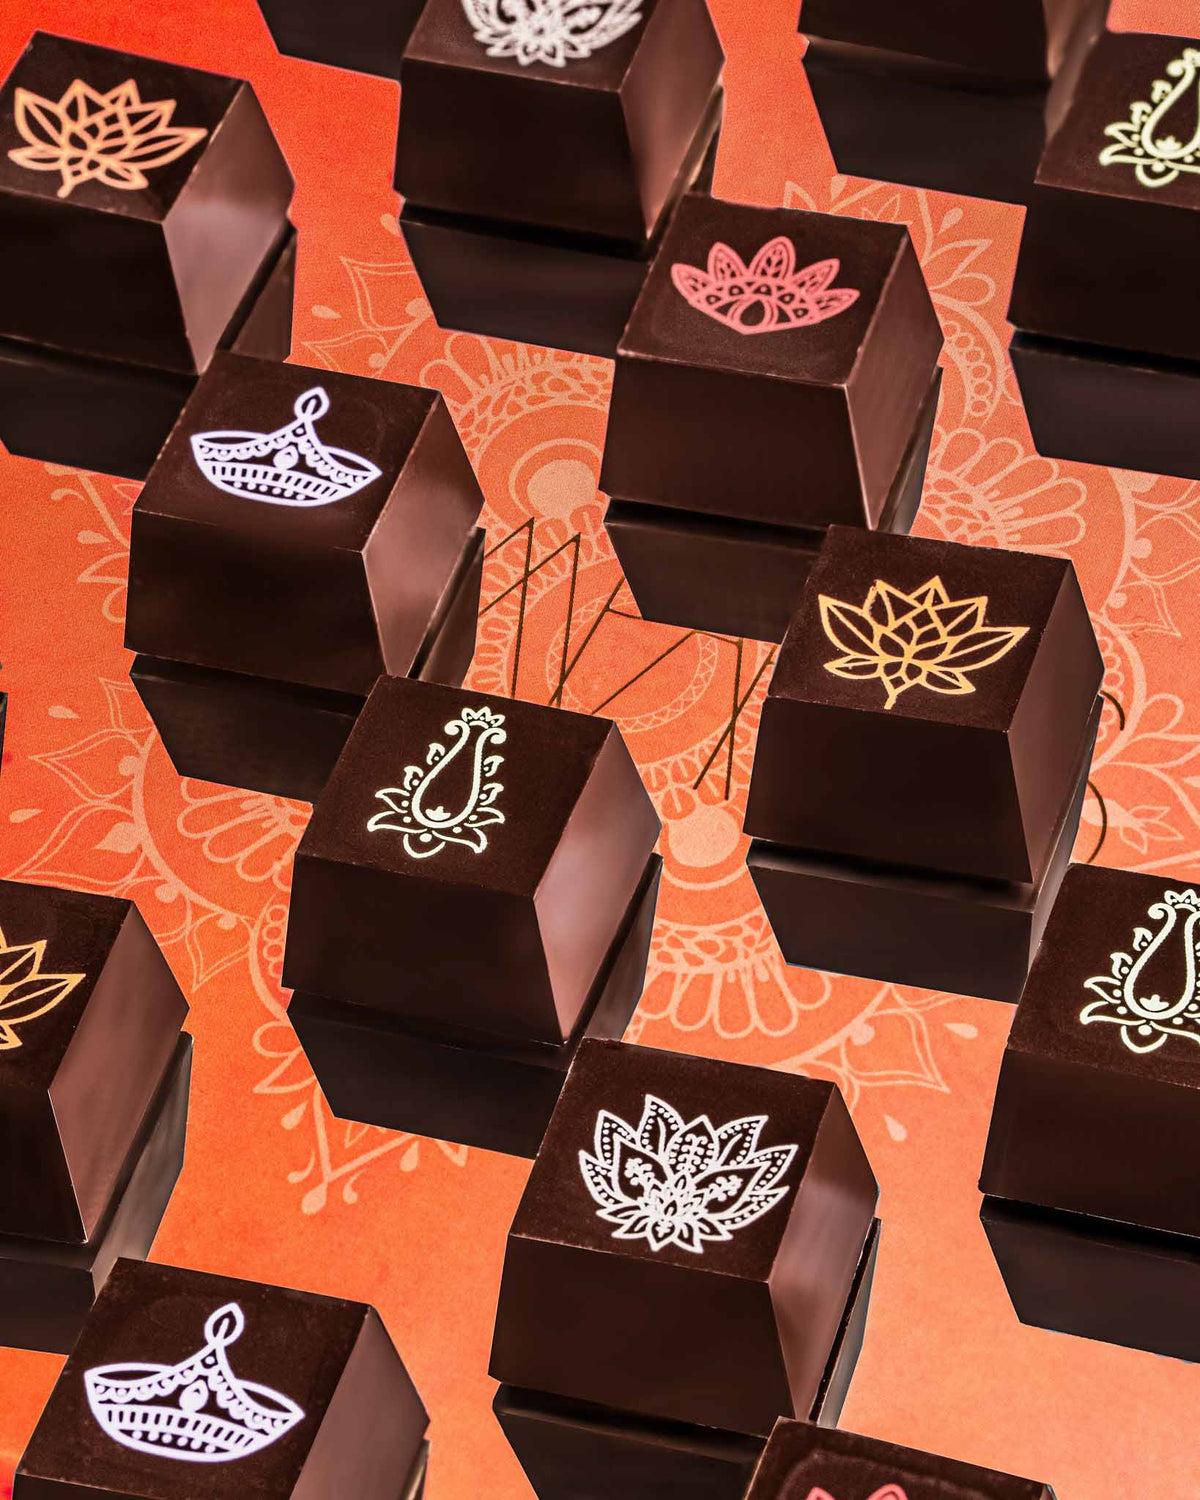 Diwali Chocolate Gift Box - Limited Edition Flavors